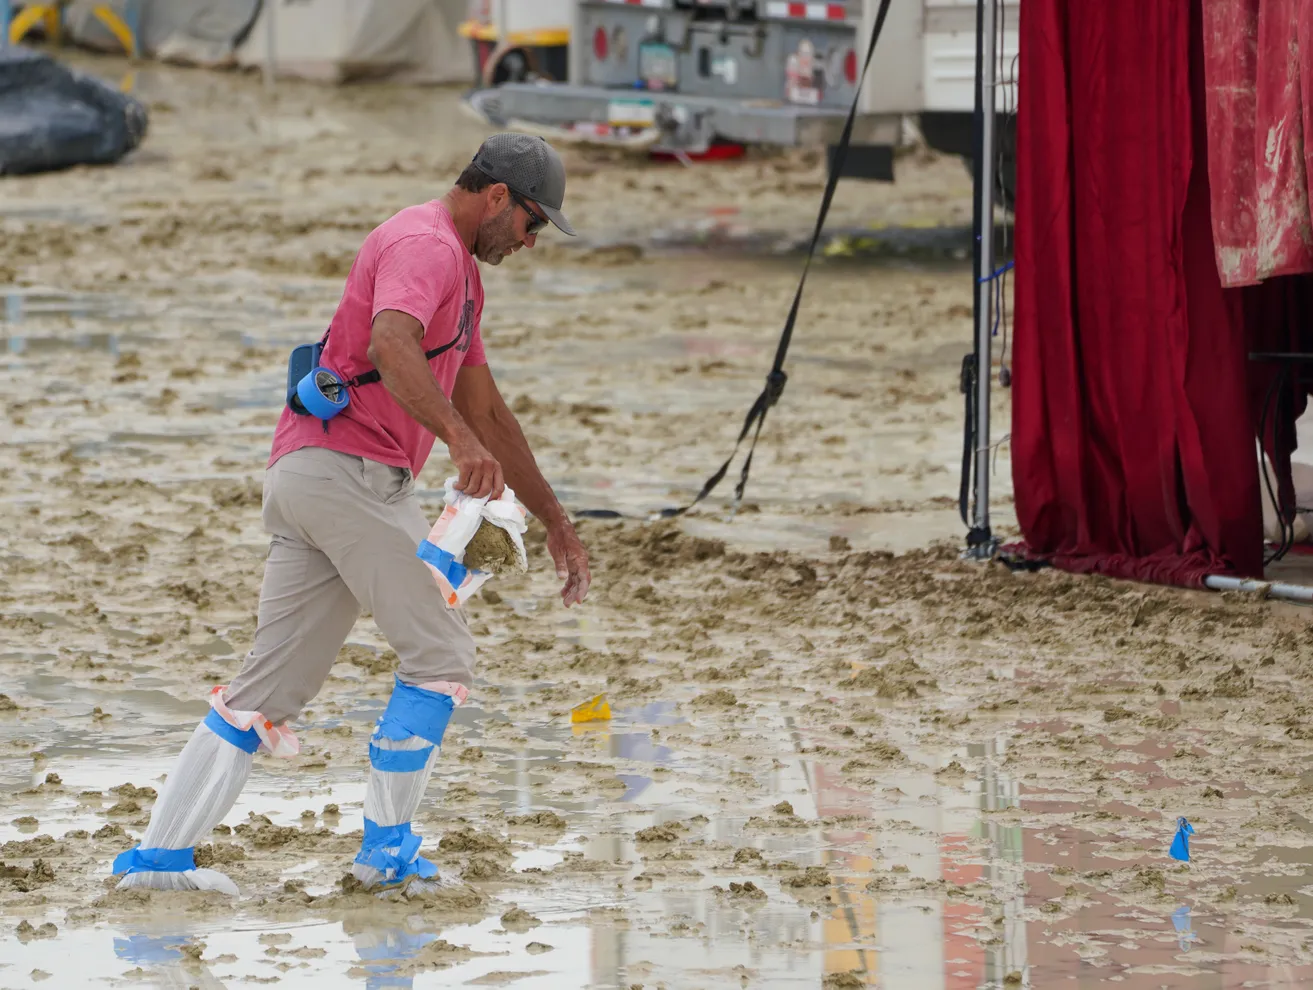 A Burning Man participant wearing plastic bags taped over his feet trudges through the mud in Black Rock City, in the Nevada desert, after a rainstorm flooded the site and stranded thousands, 2 September 2023. Photo: Trevor Hughes / USA TODAY